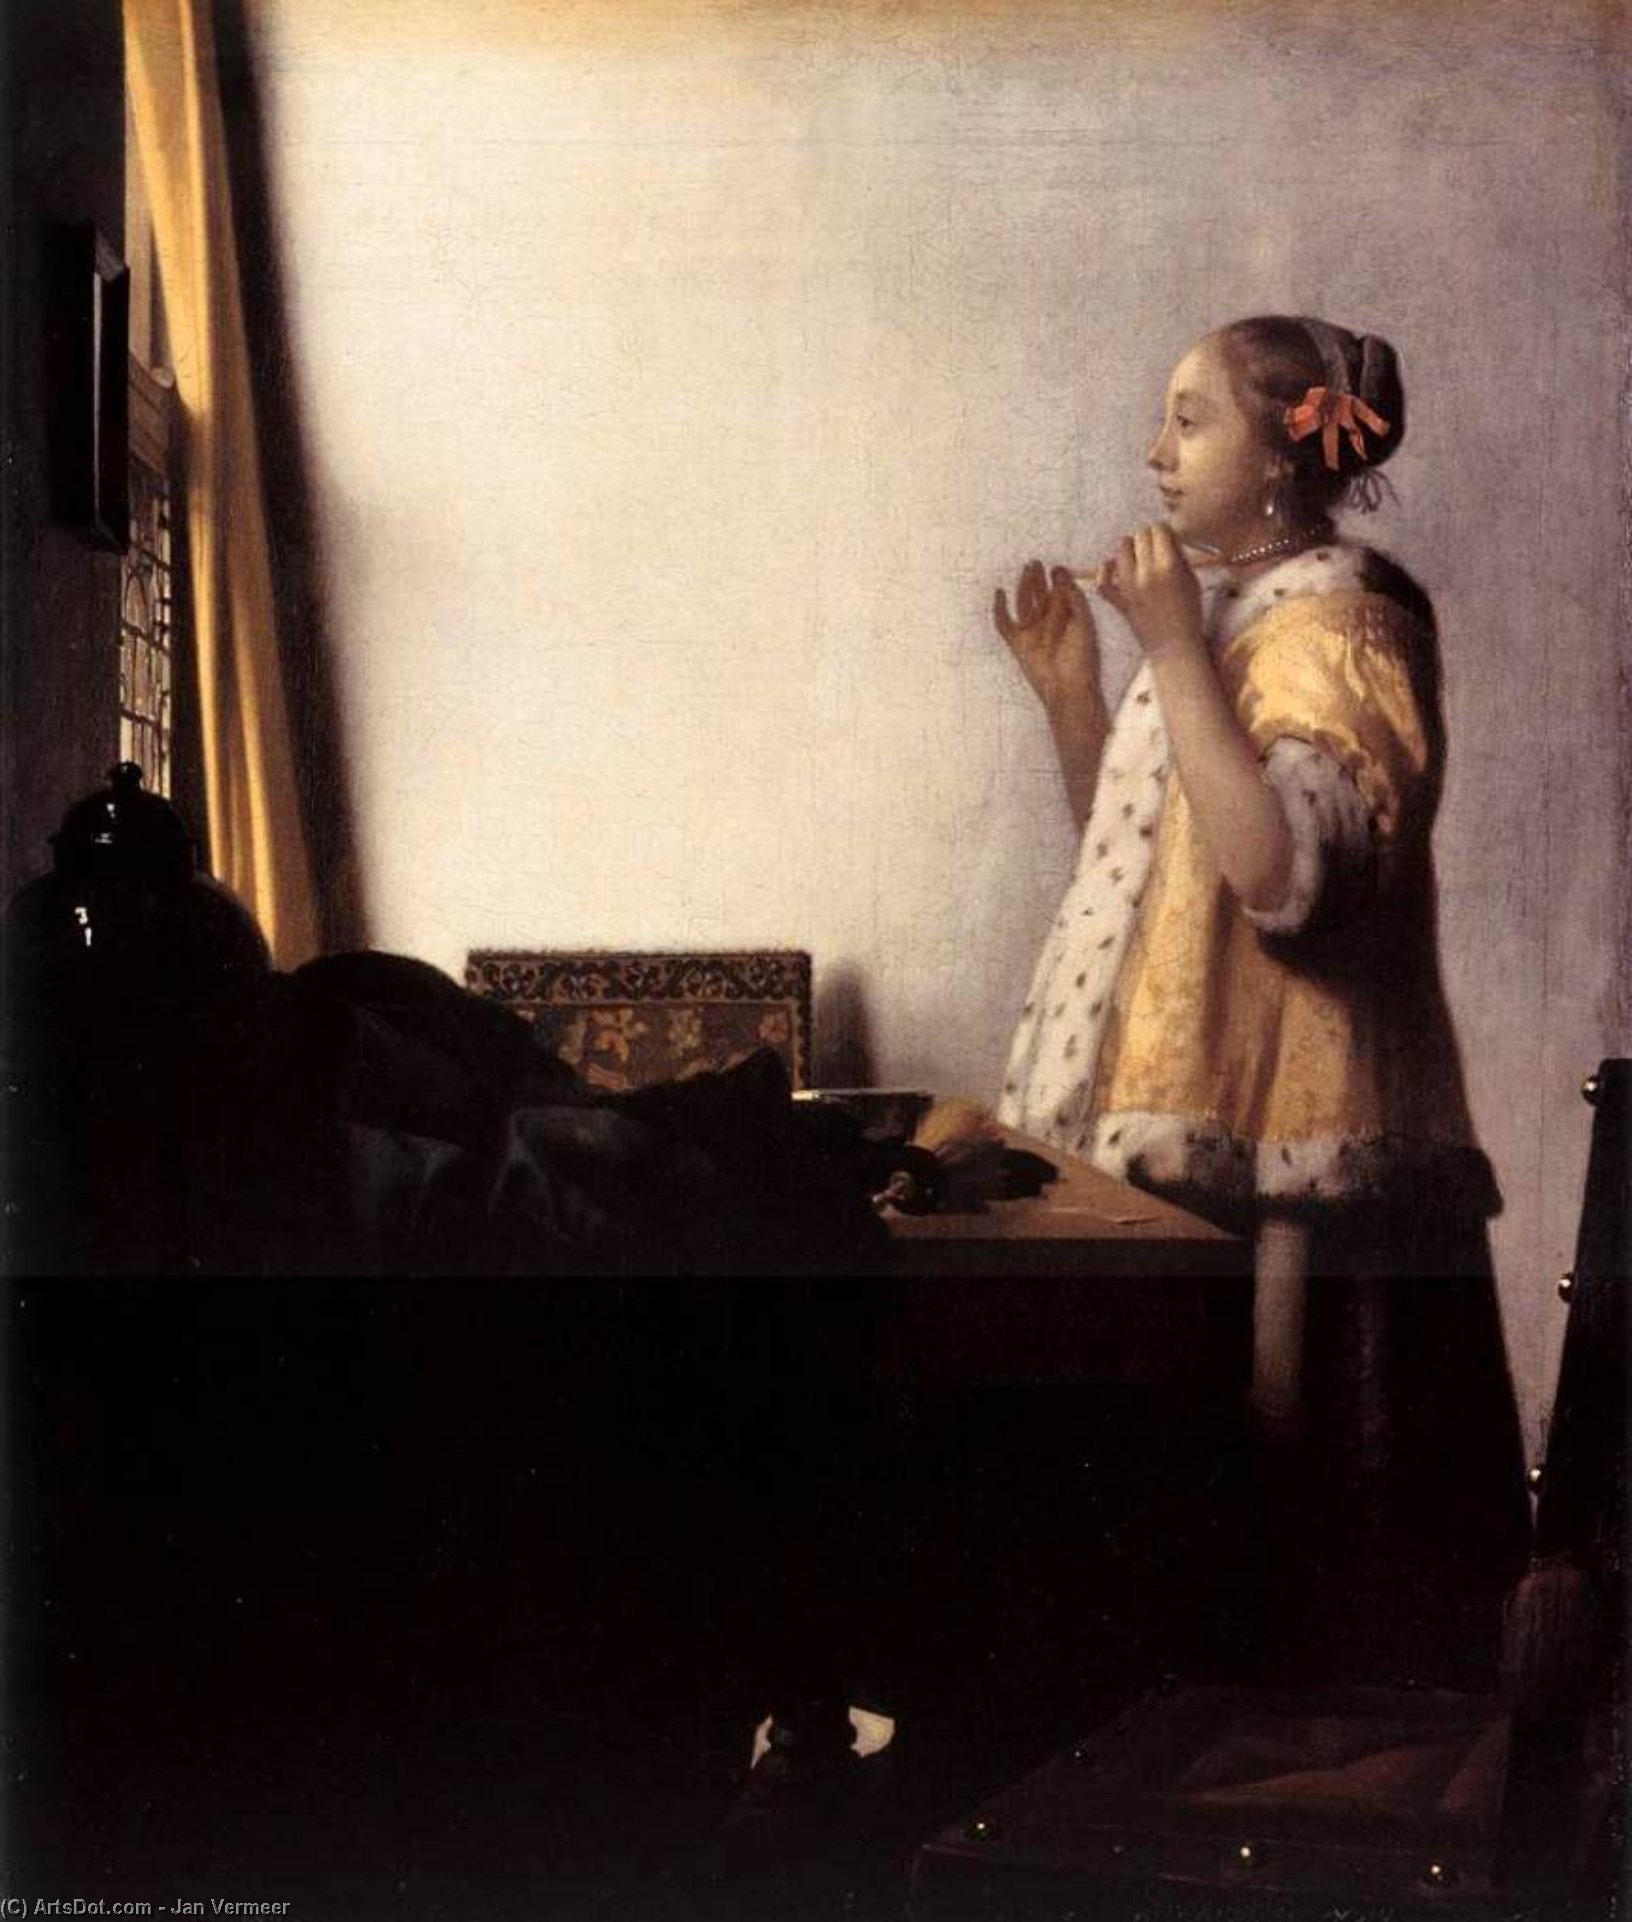 WikiOO.org - 백과 사전 - 회화, 삽화 Jan Vermeer - Woman with a Pearl Necklace